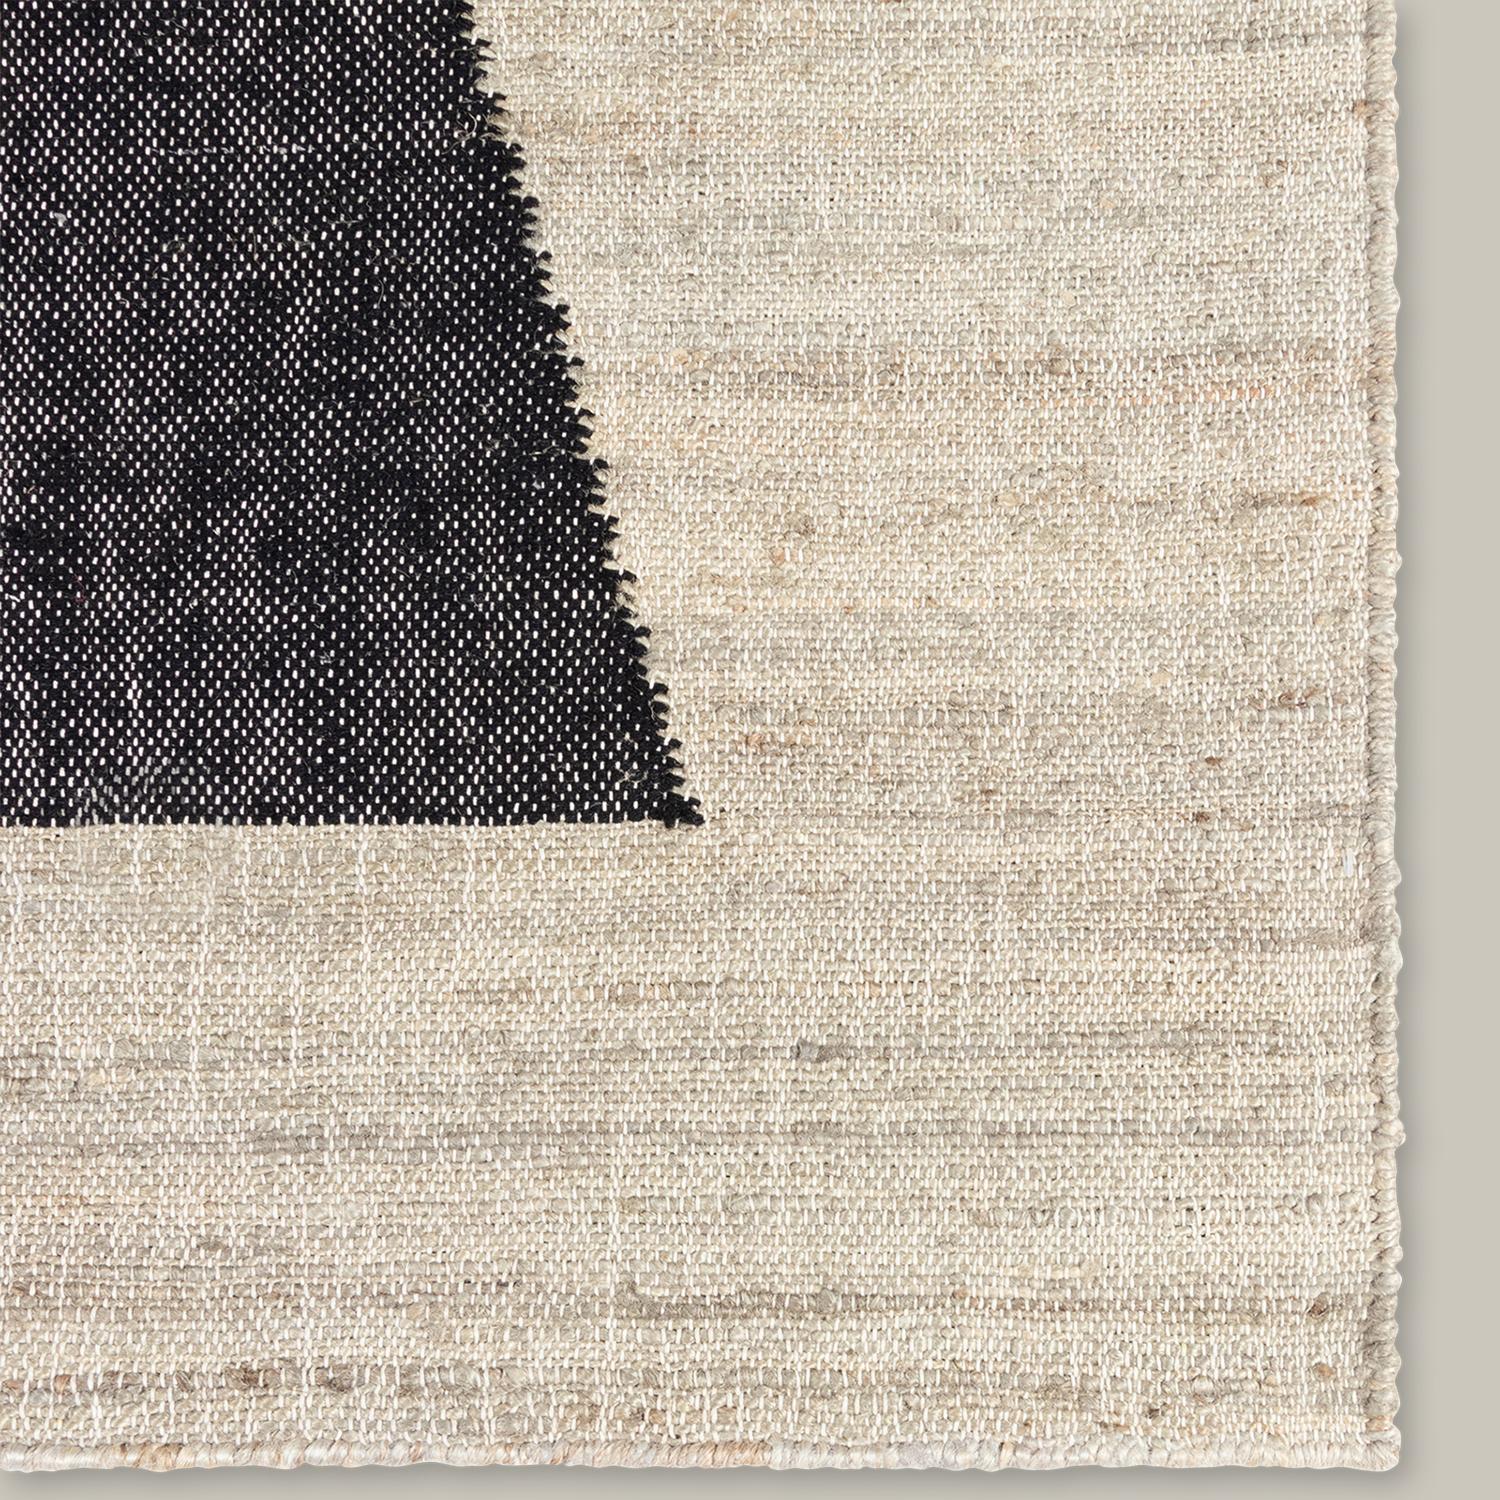 Grounded in the beauty of raw materials, the Gurara Collection’s tones and textures are inspired by Brancusi. The interwoven pattern, constructed of jute, varies in its colors and shapes but is always connected by the maker’s technique. Sculptural